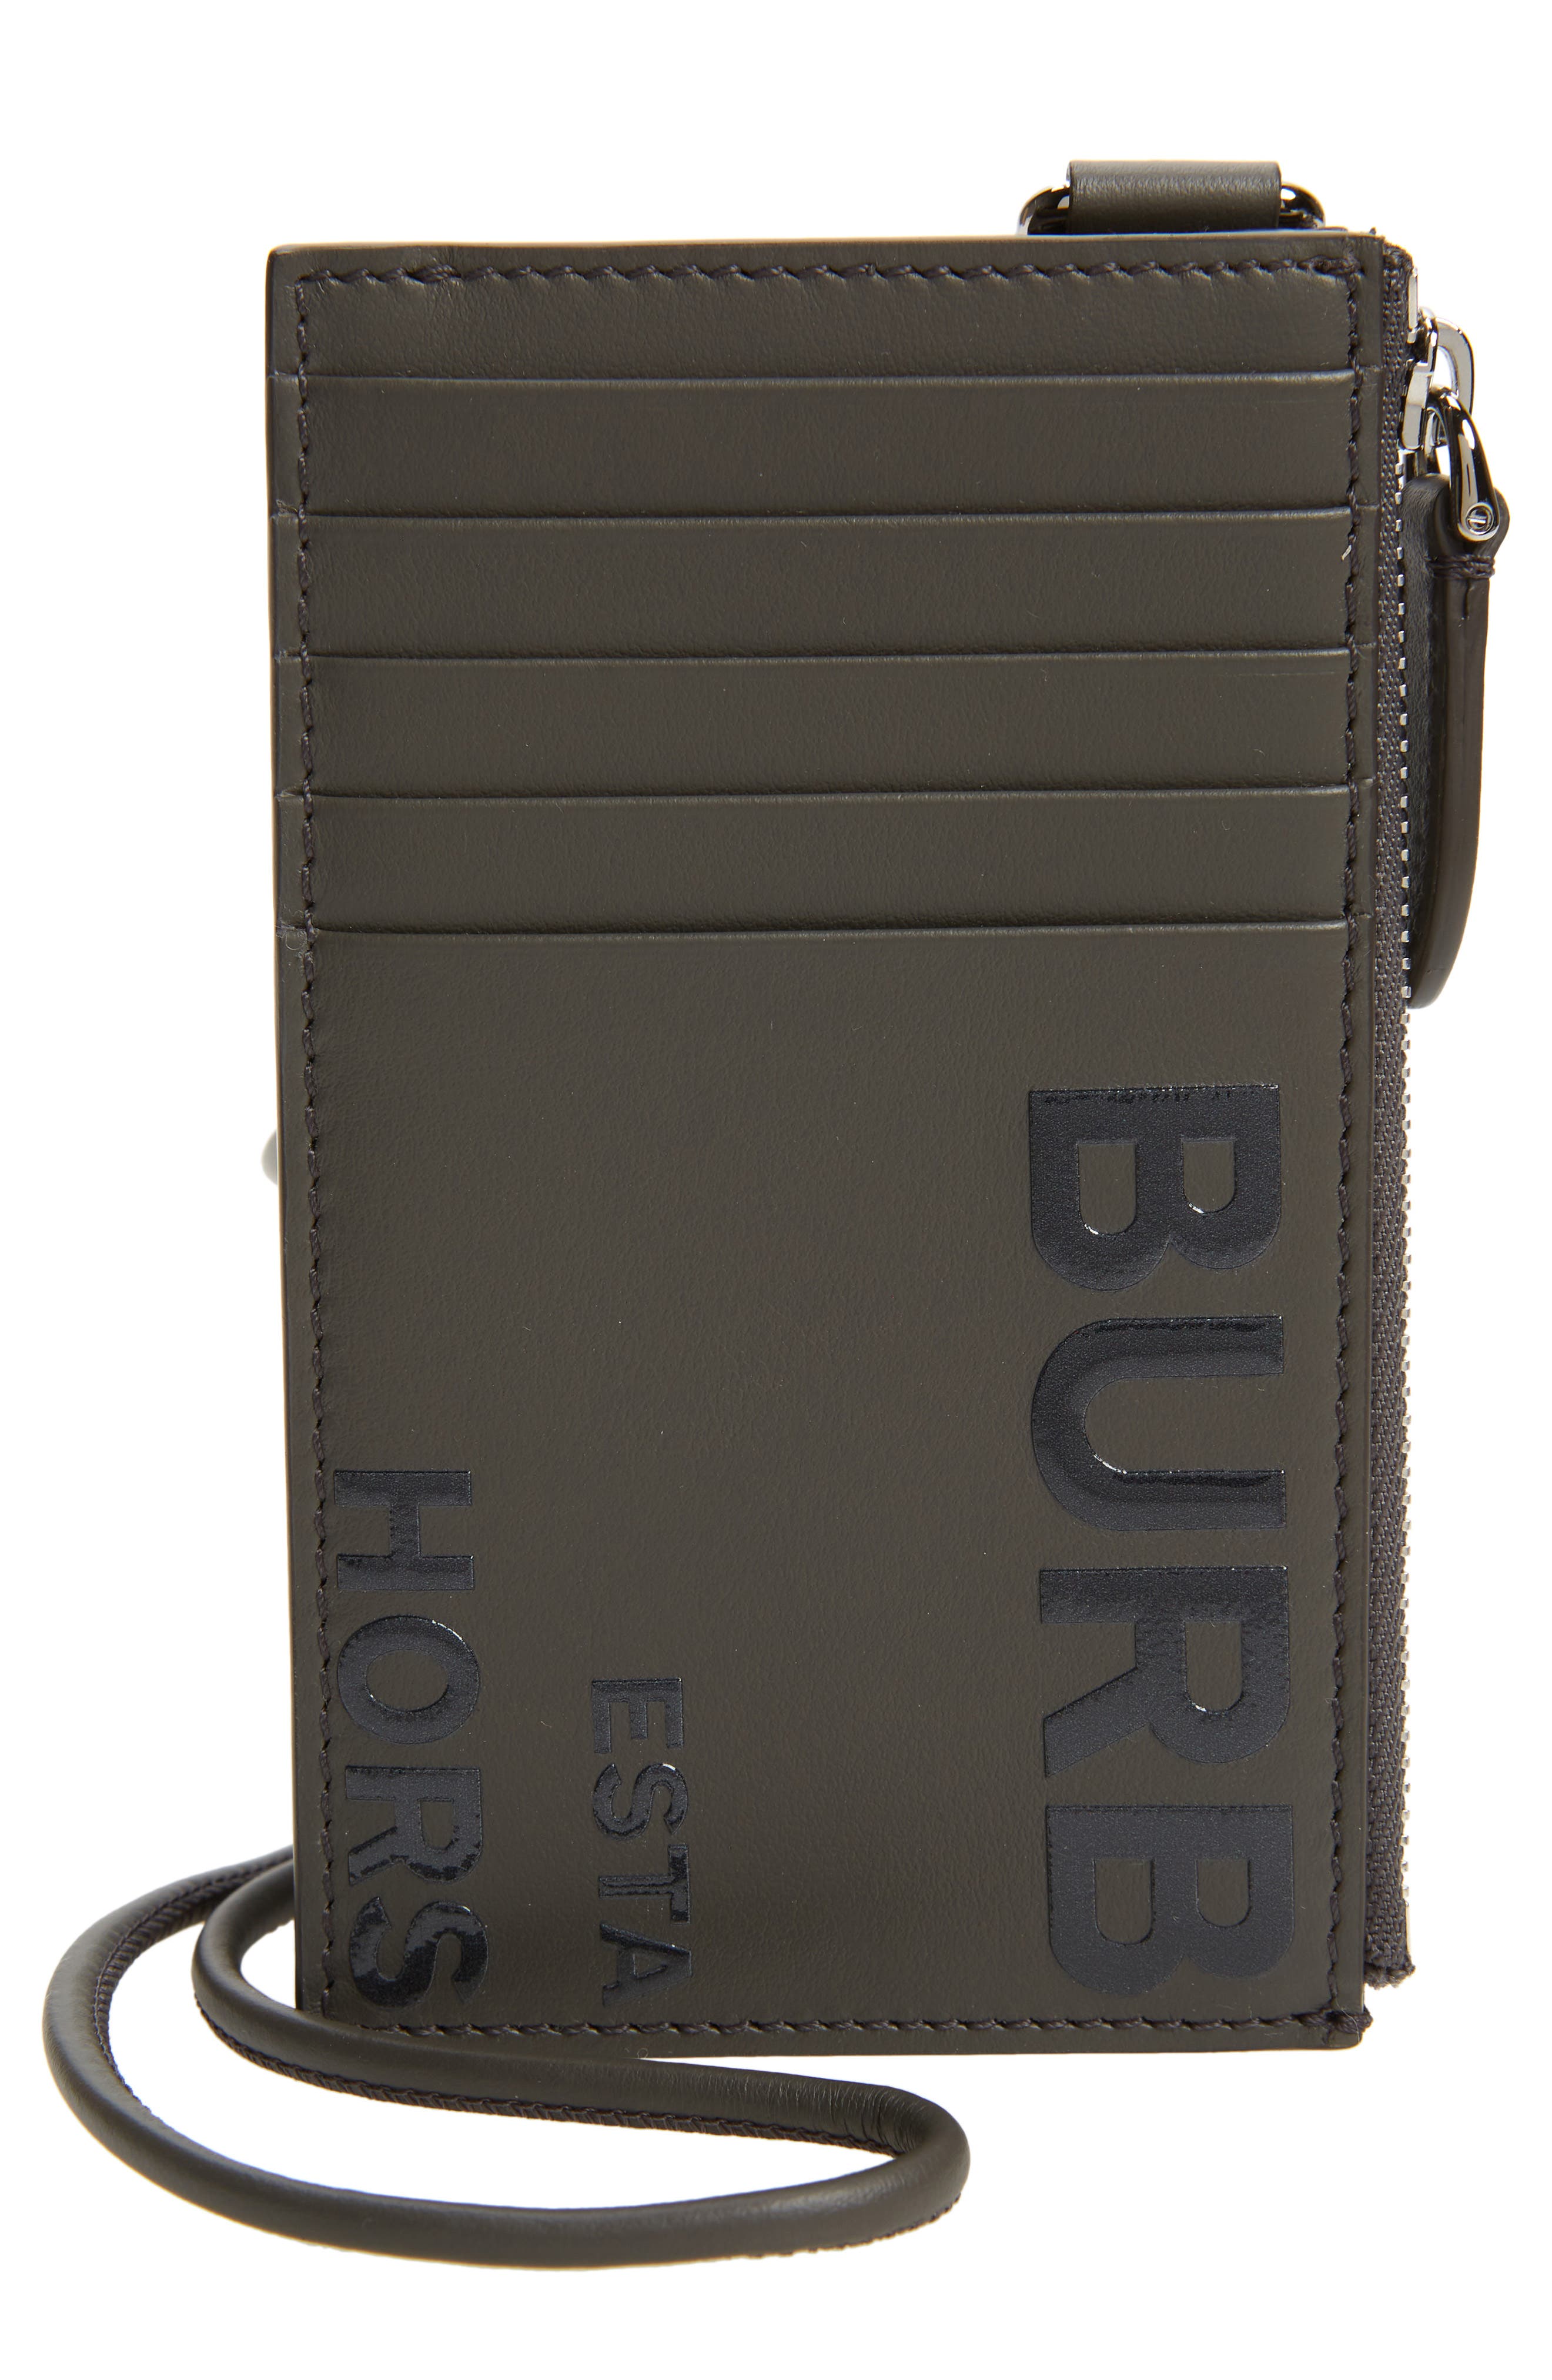 Burberry Alwyn Horseferry Logo Leather Lanyard Card Case in Graphite at Nordstrom